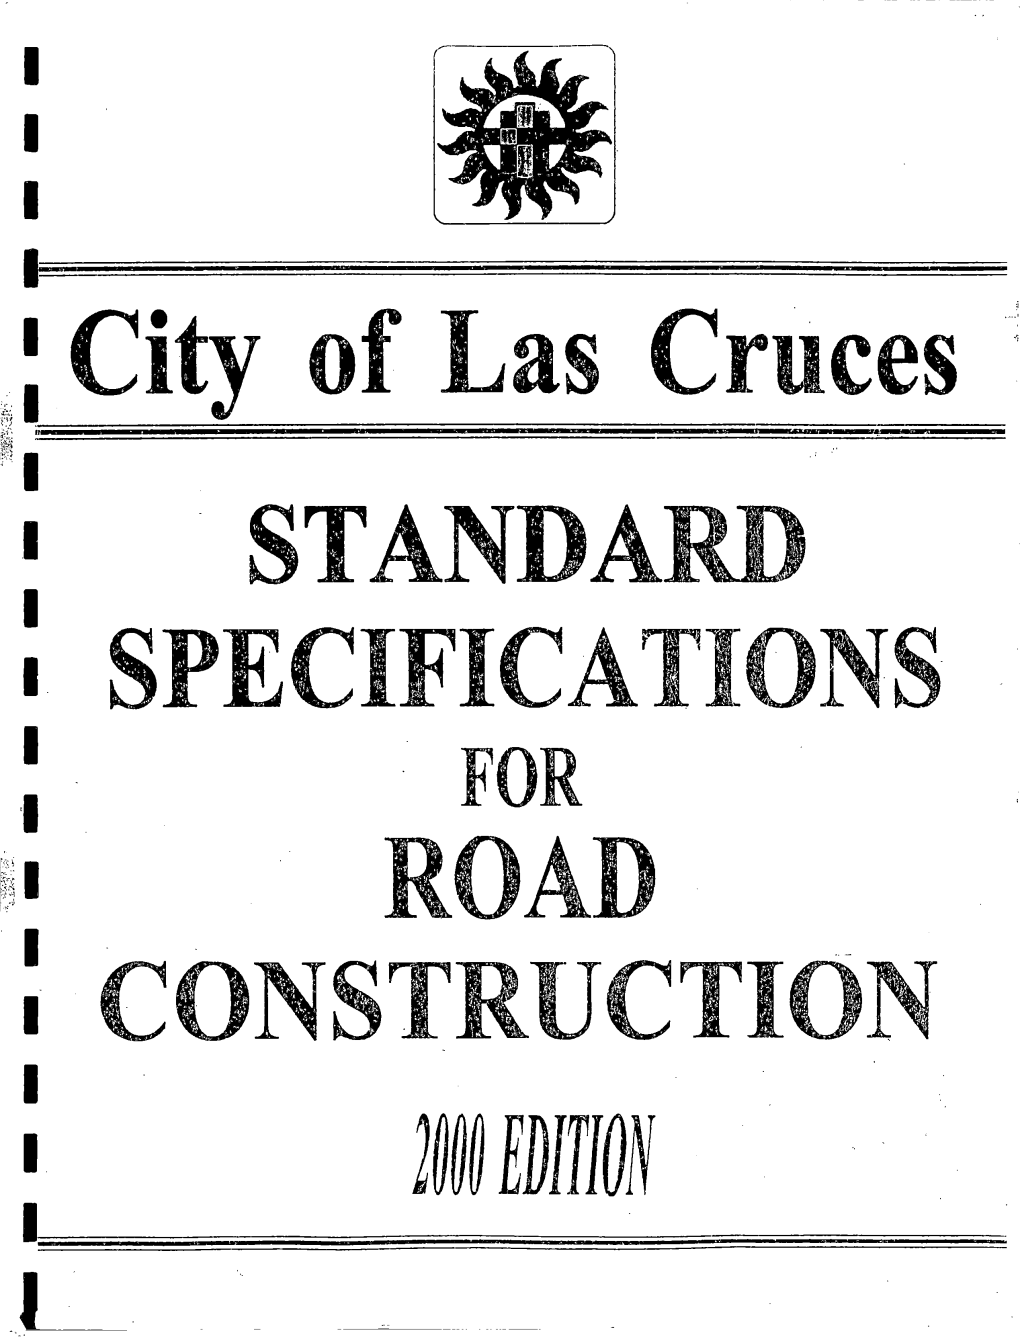 City of Las Cruces Standard Specifications for Road Construction